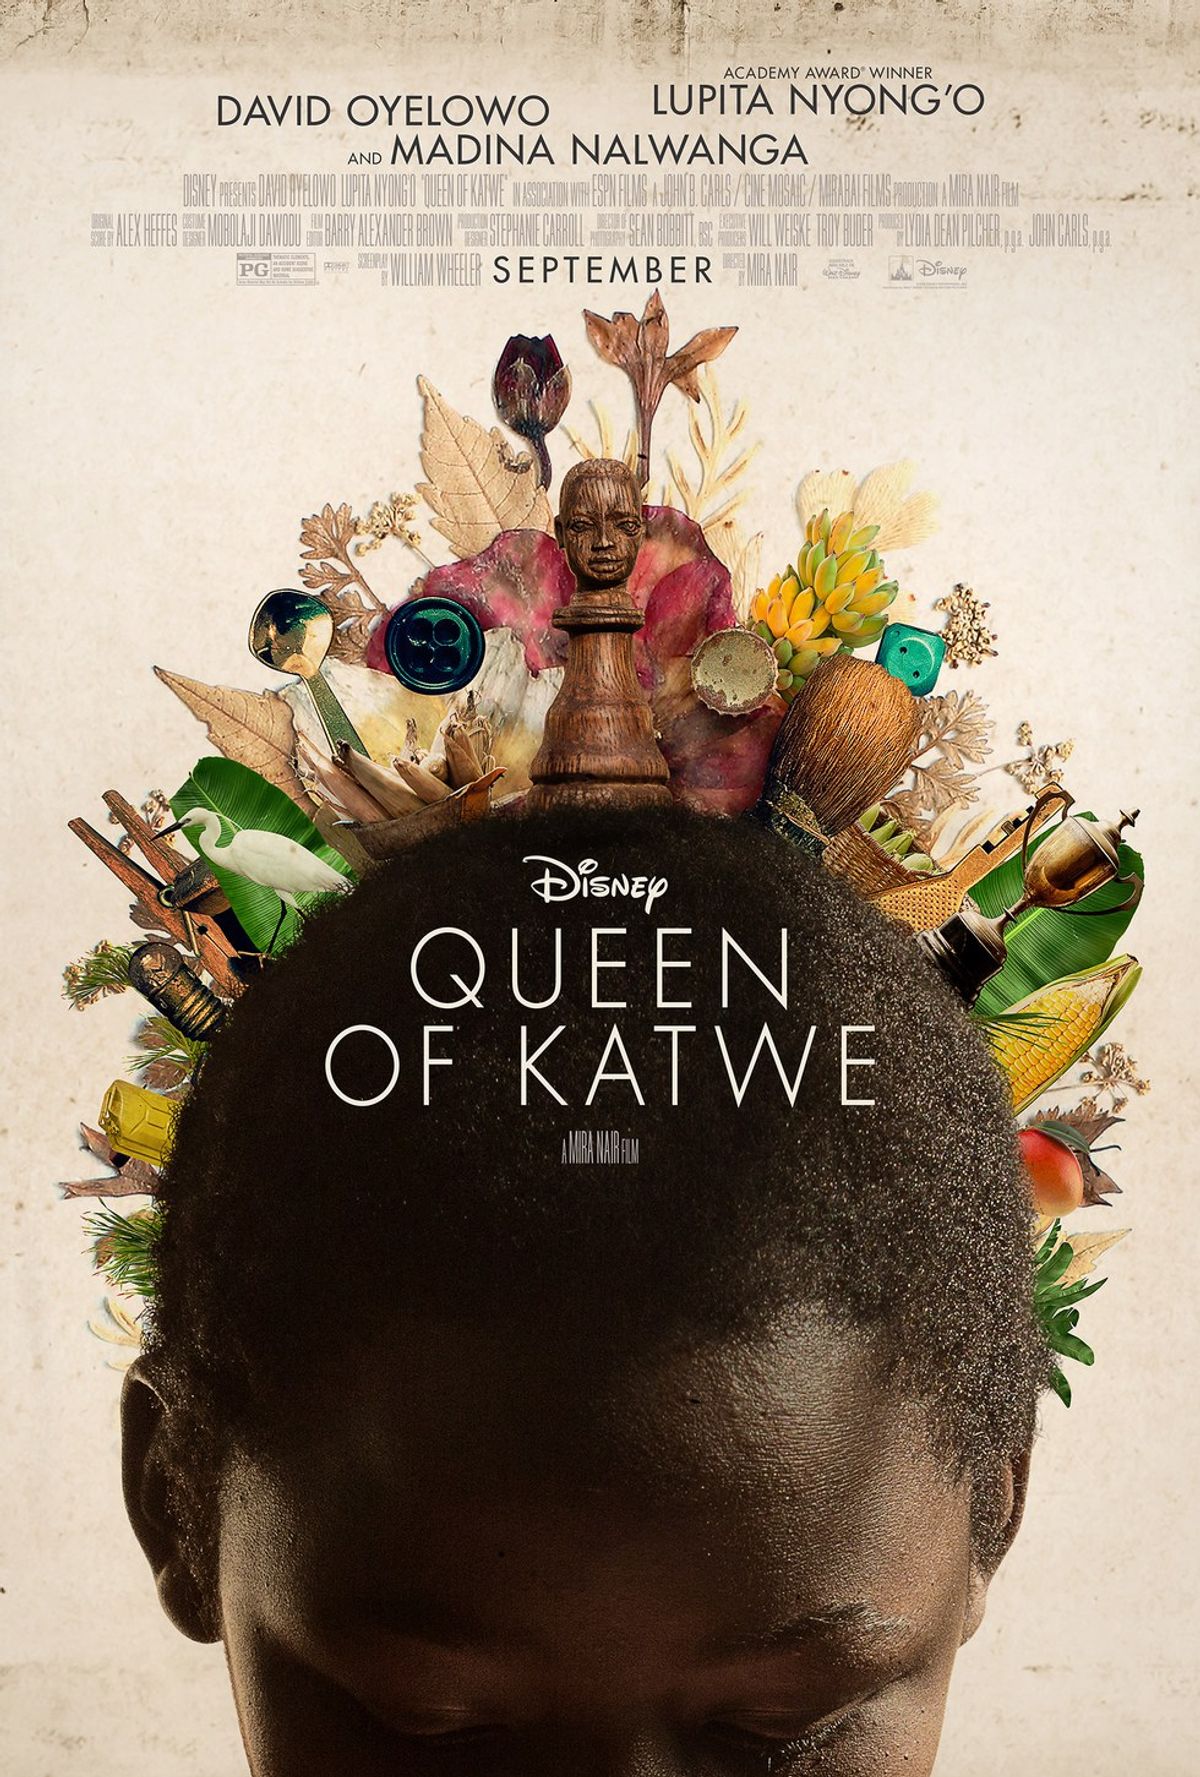 My Top 5 Favorite Quotes from Queen of Katwe